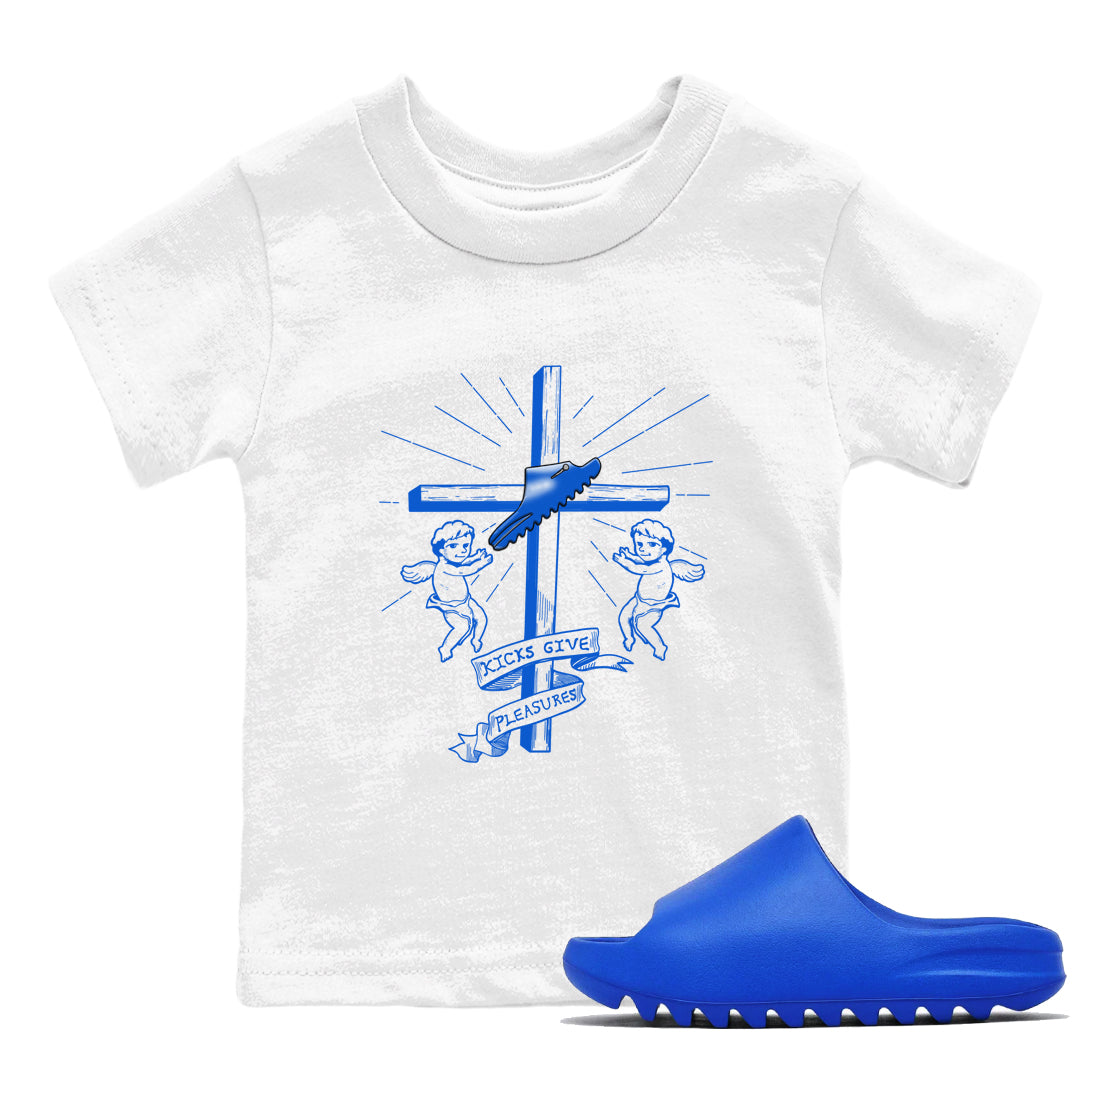 Yeezy Slide Azure shirts to match jordans Kicks Give You Pleasures sneaker match tees Yeezy Slide Azure SNRT Sneaker Tees streetwear brand Baby and Youth White 1 cotton tee